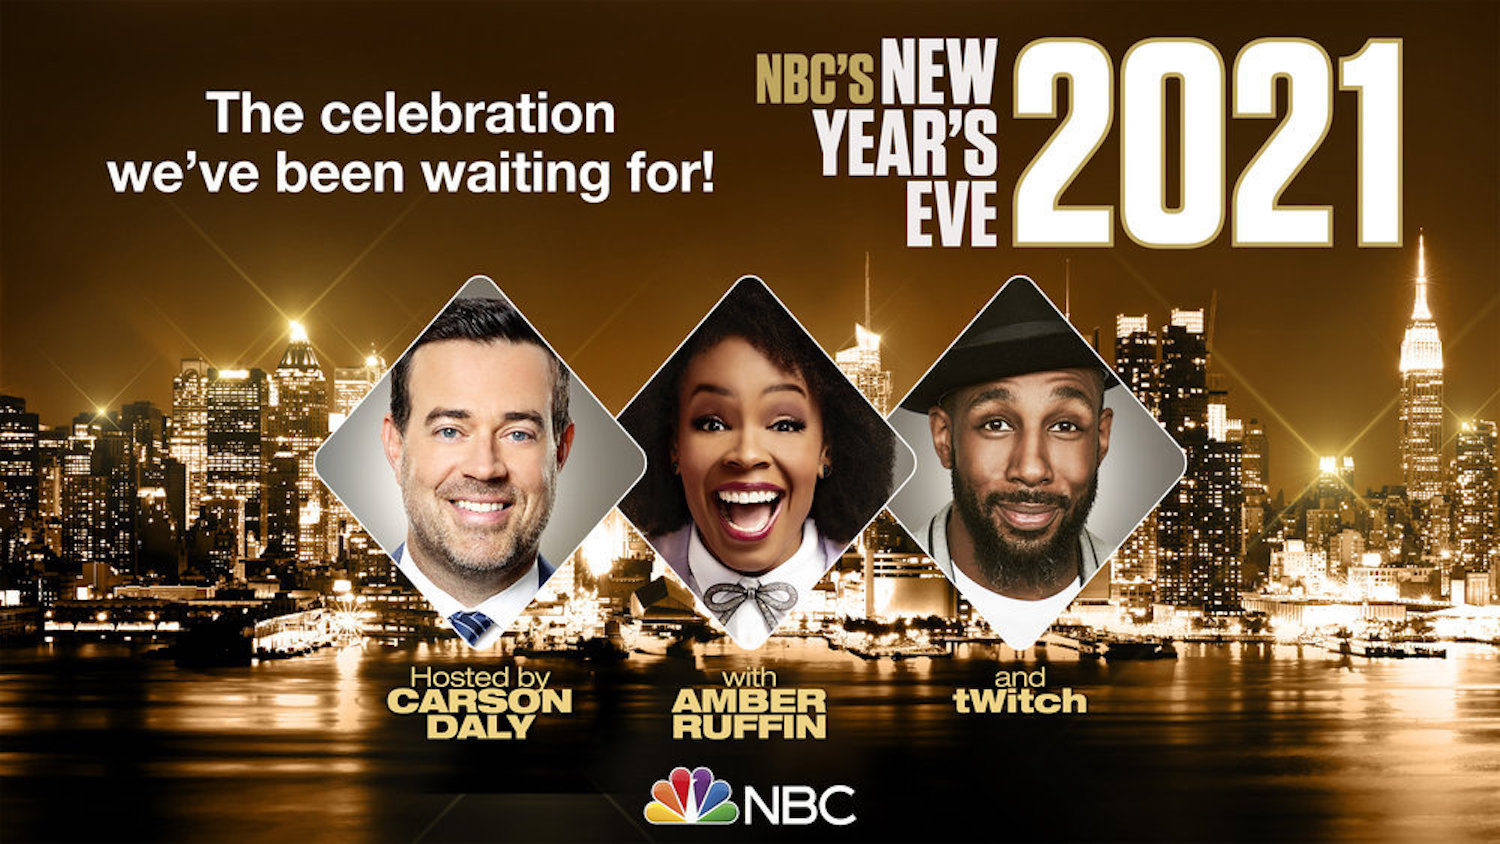 NBC's New Years Eve 2021 Carson Daly Amber Ruffin tWitch